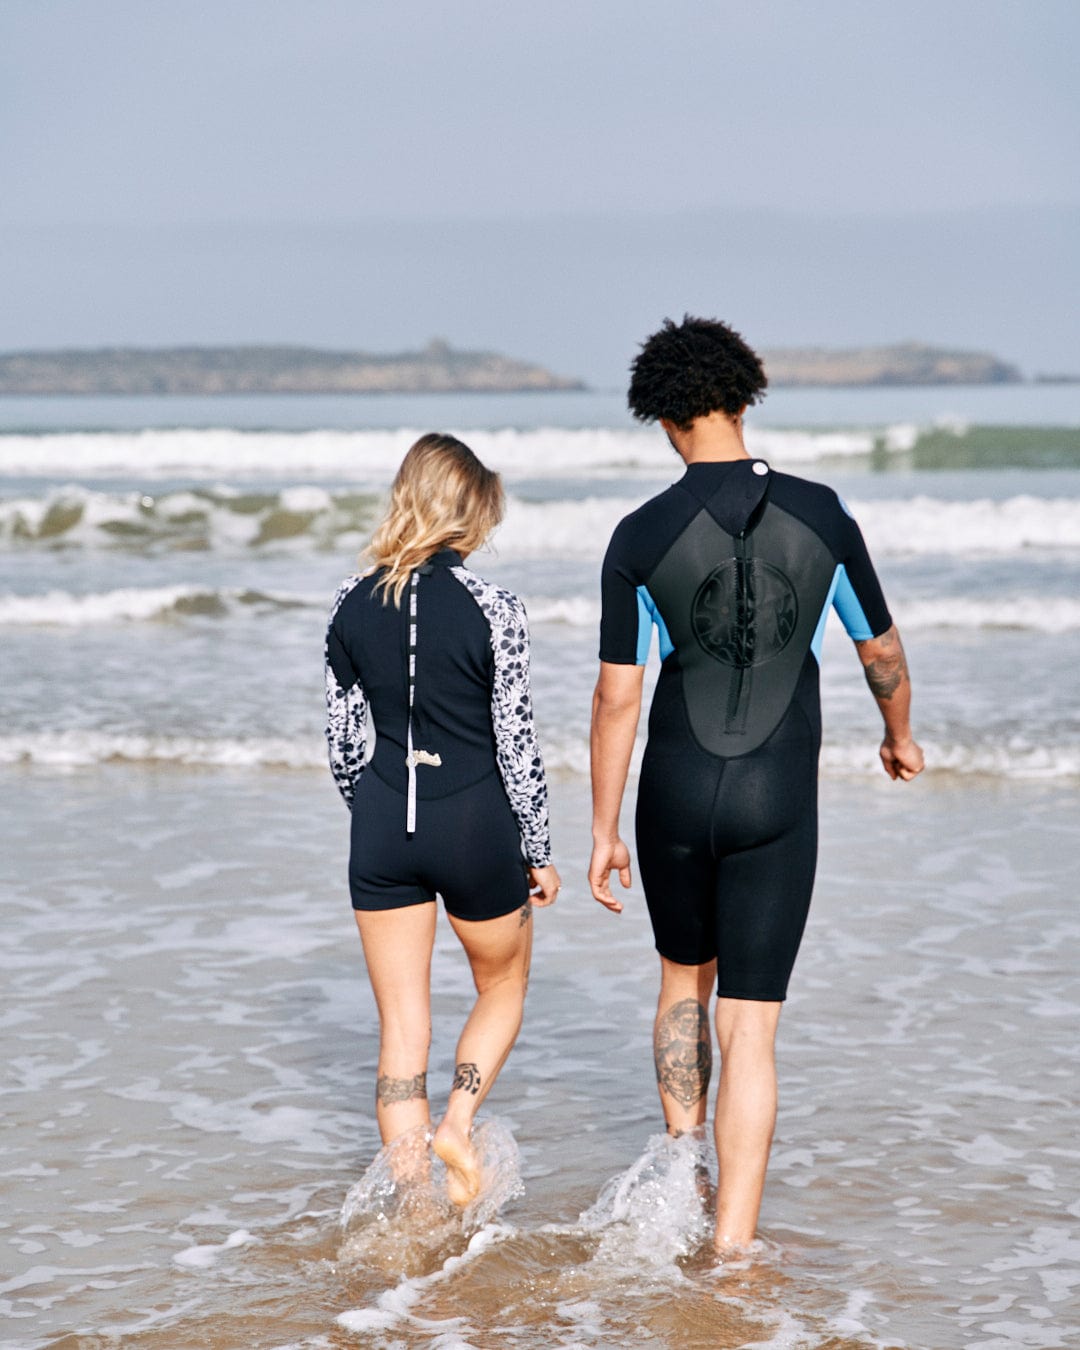 Two people in Saltrock neoprene wetsuits walking into the sea, holding hands, with tattoos visible on their arms.